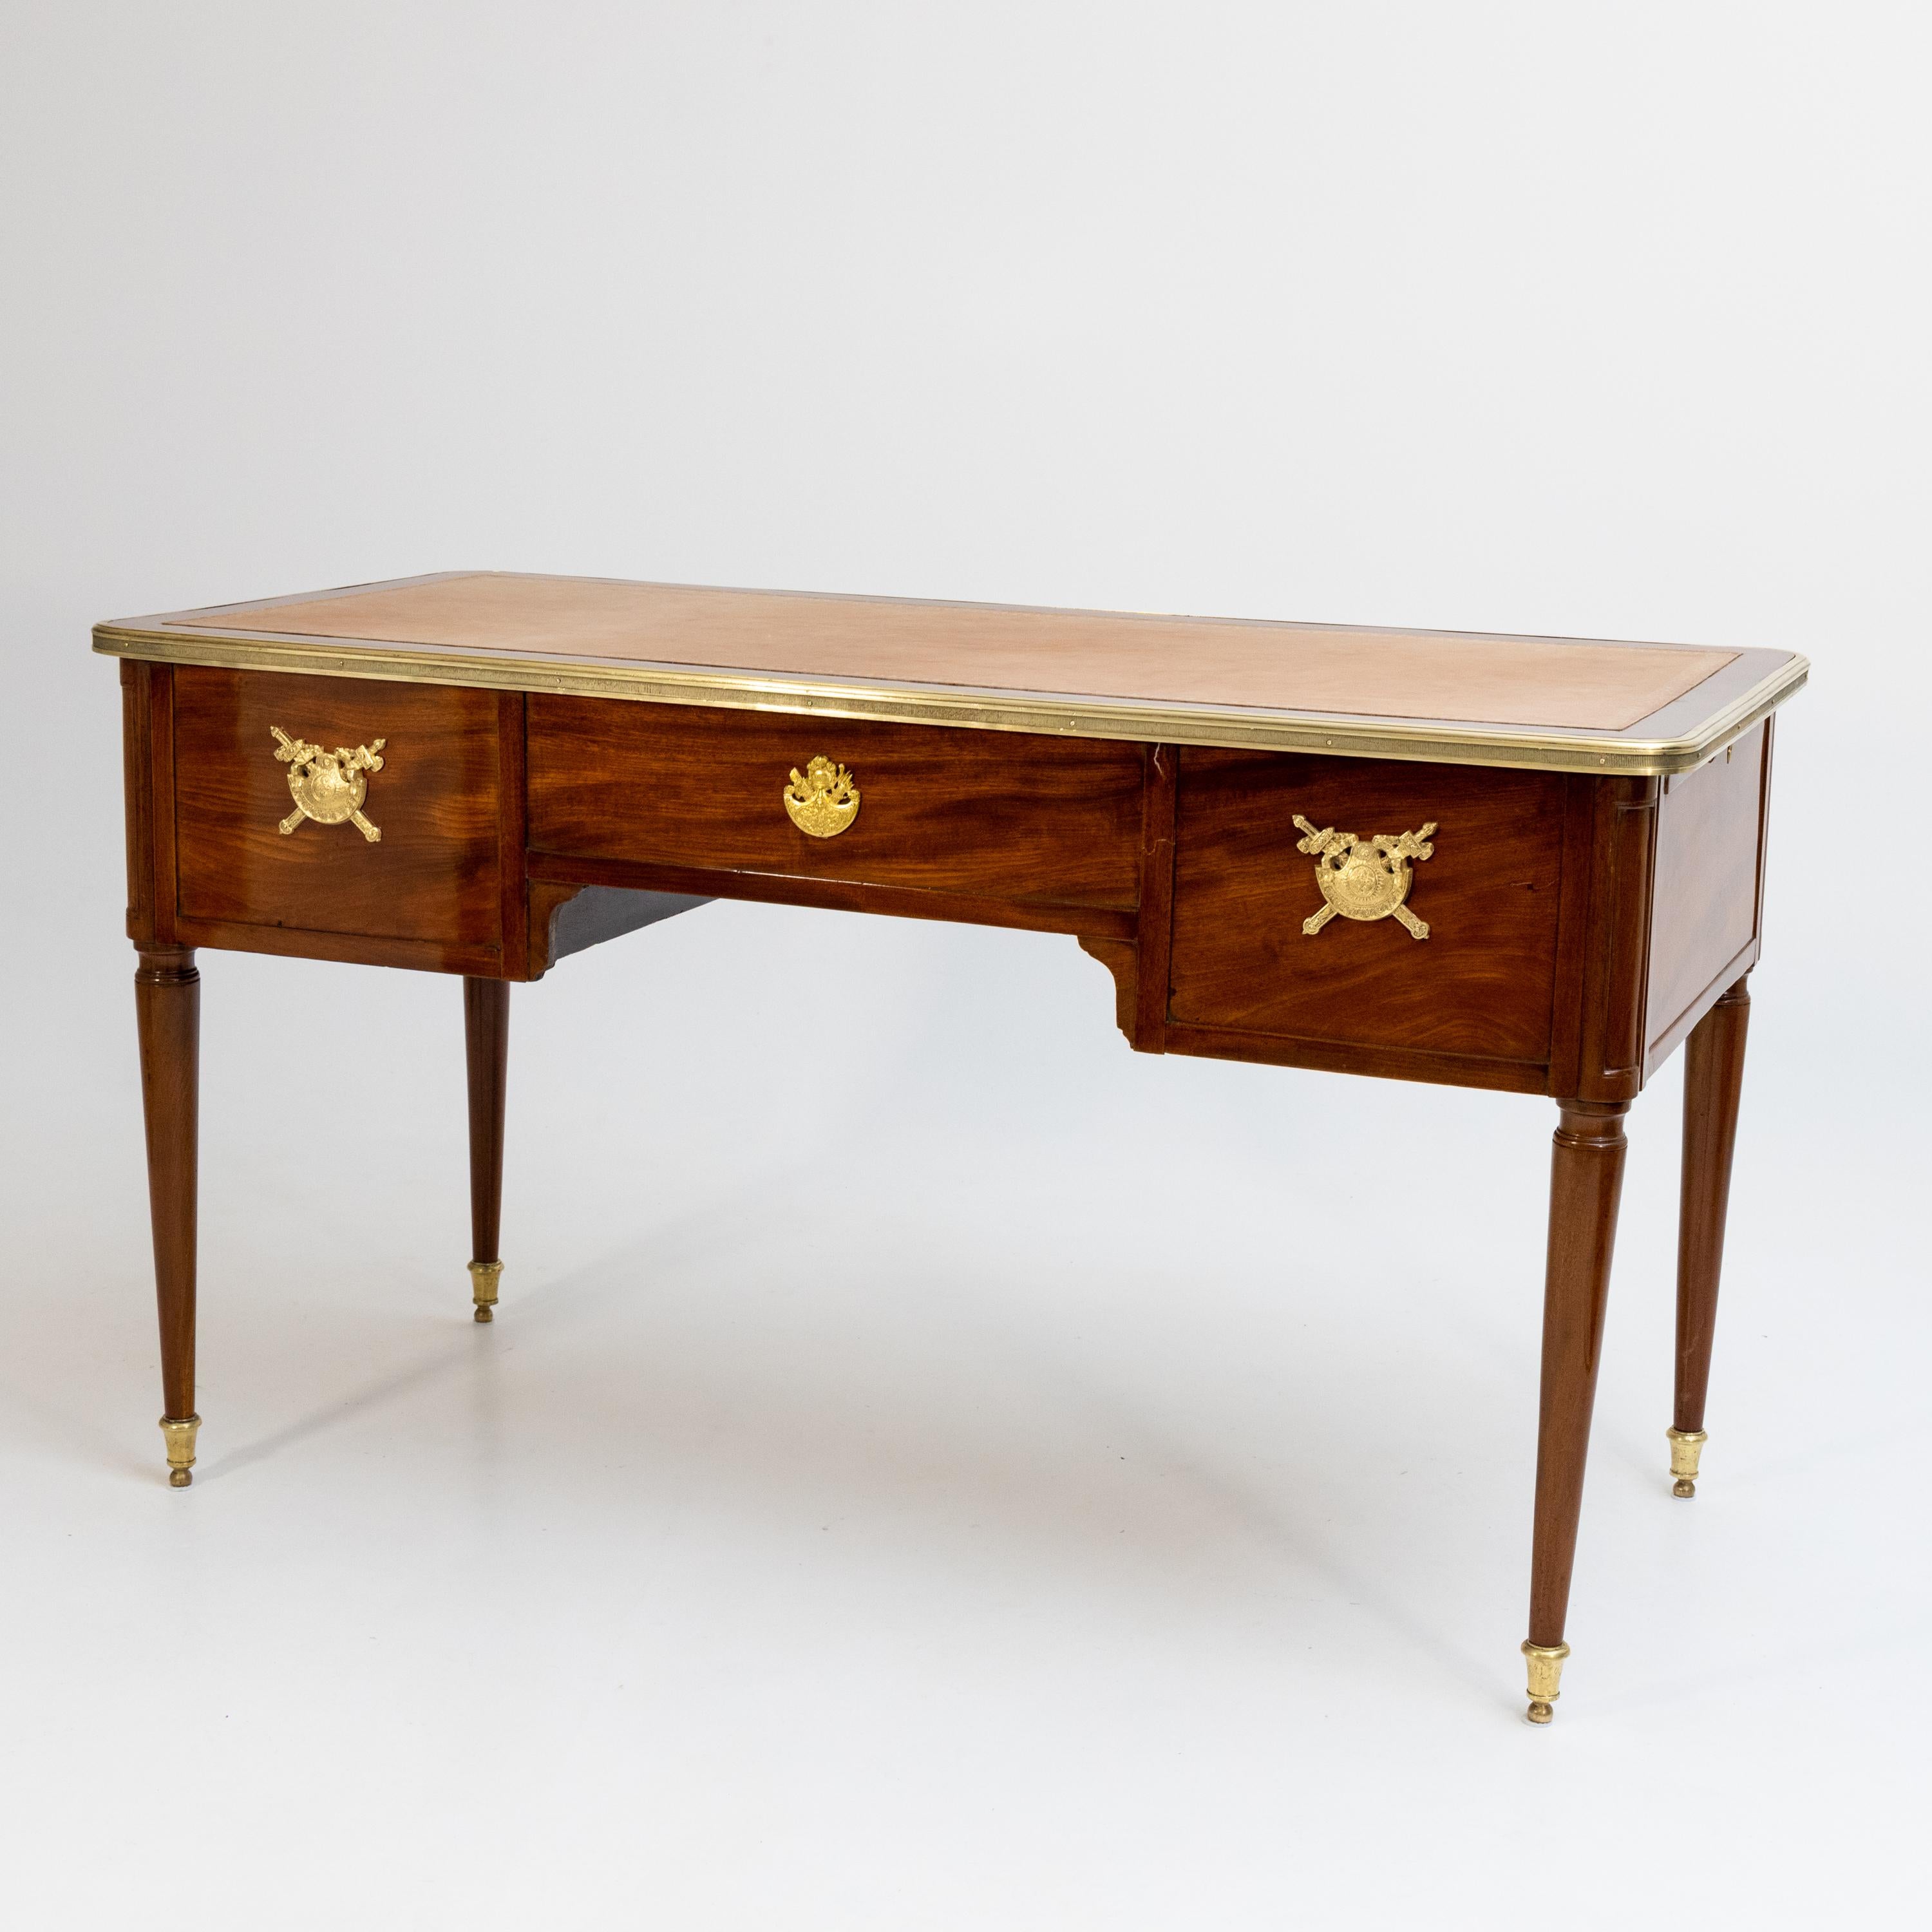 Bureau Plat on conical pointed legs with brass sabots and leather-covered tabletop. The front is divided into four drawers - the right one has an insert and a secret compartment. The back is designed to correspond to the front.